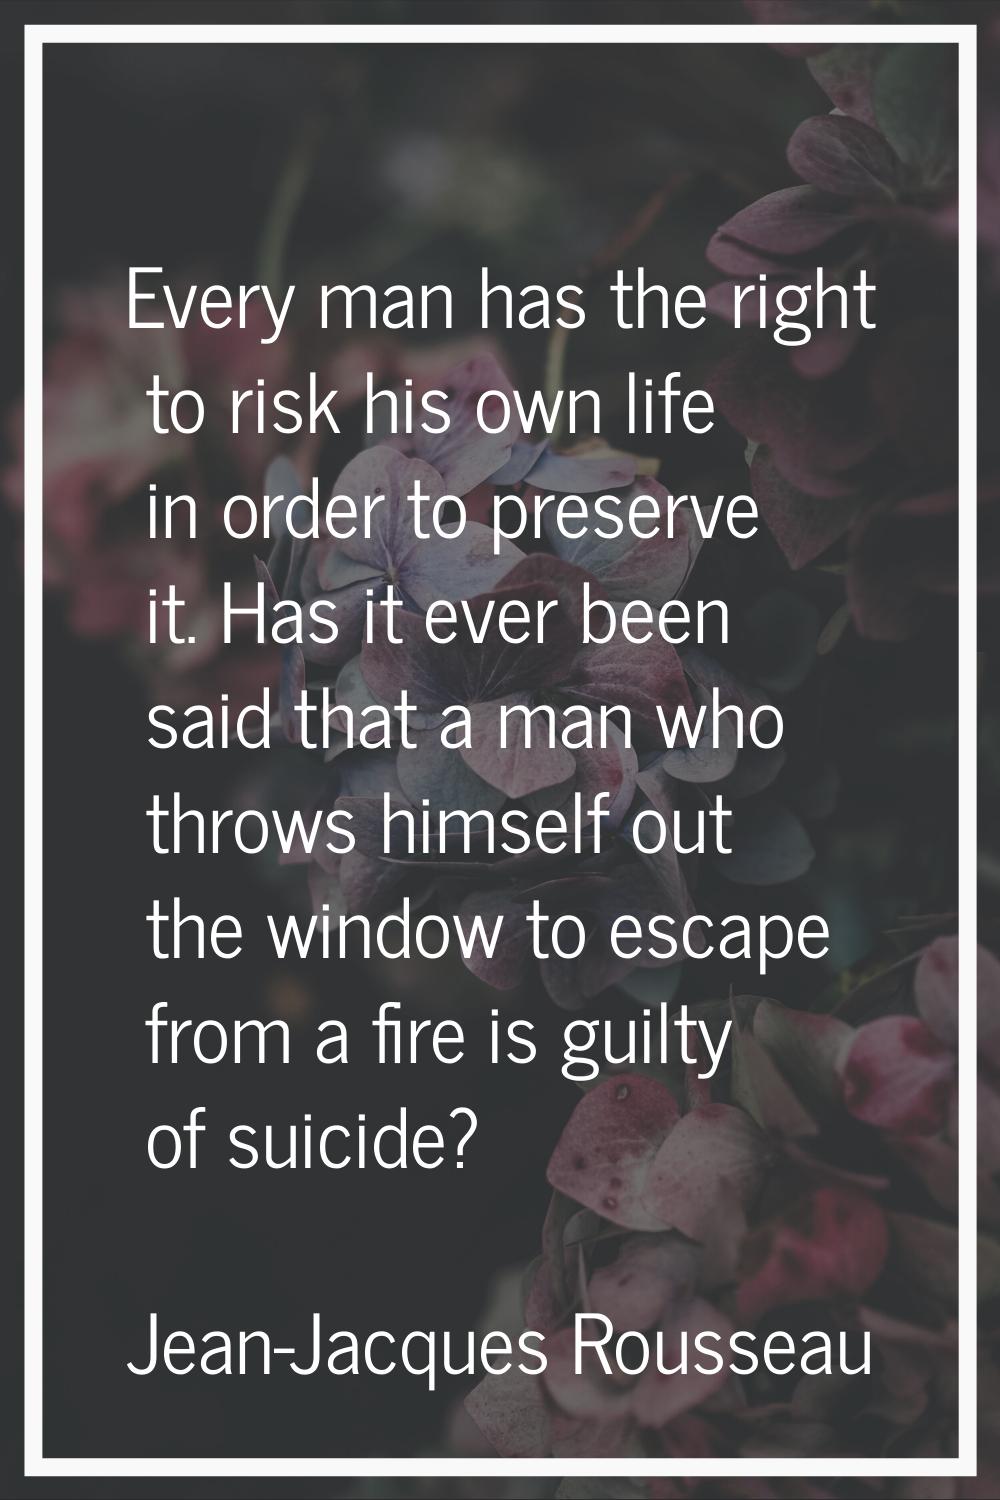 Every man has the right to risk his own life in order to preserve it. Has it ever been said that a 